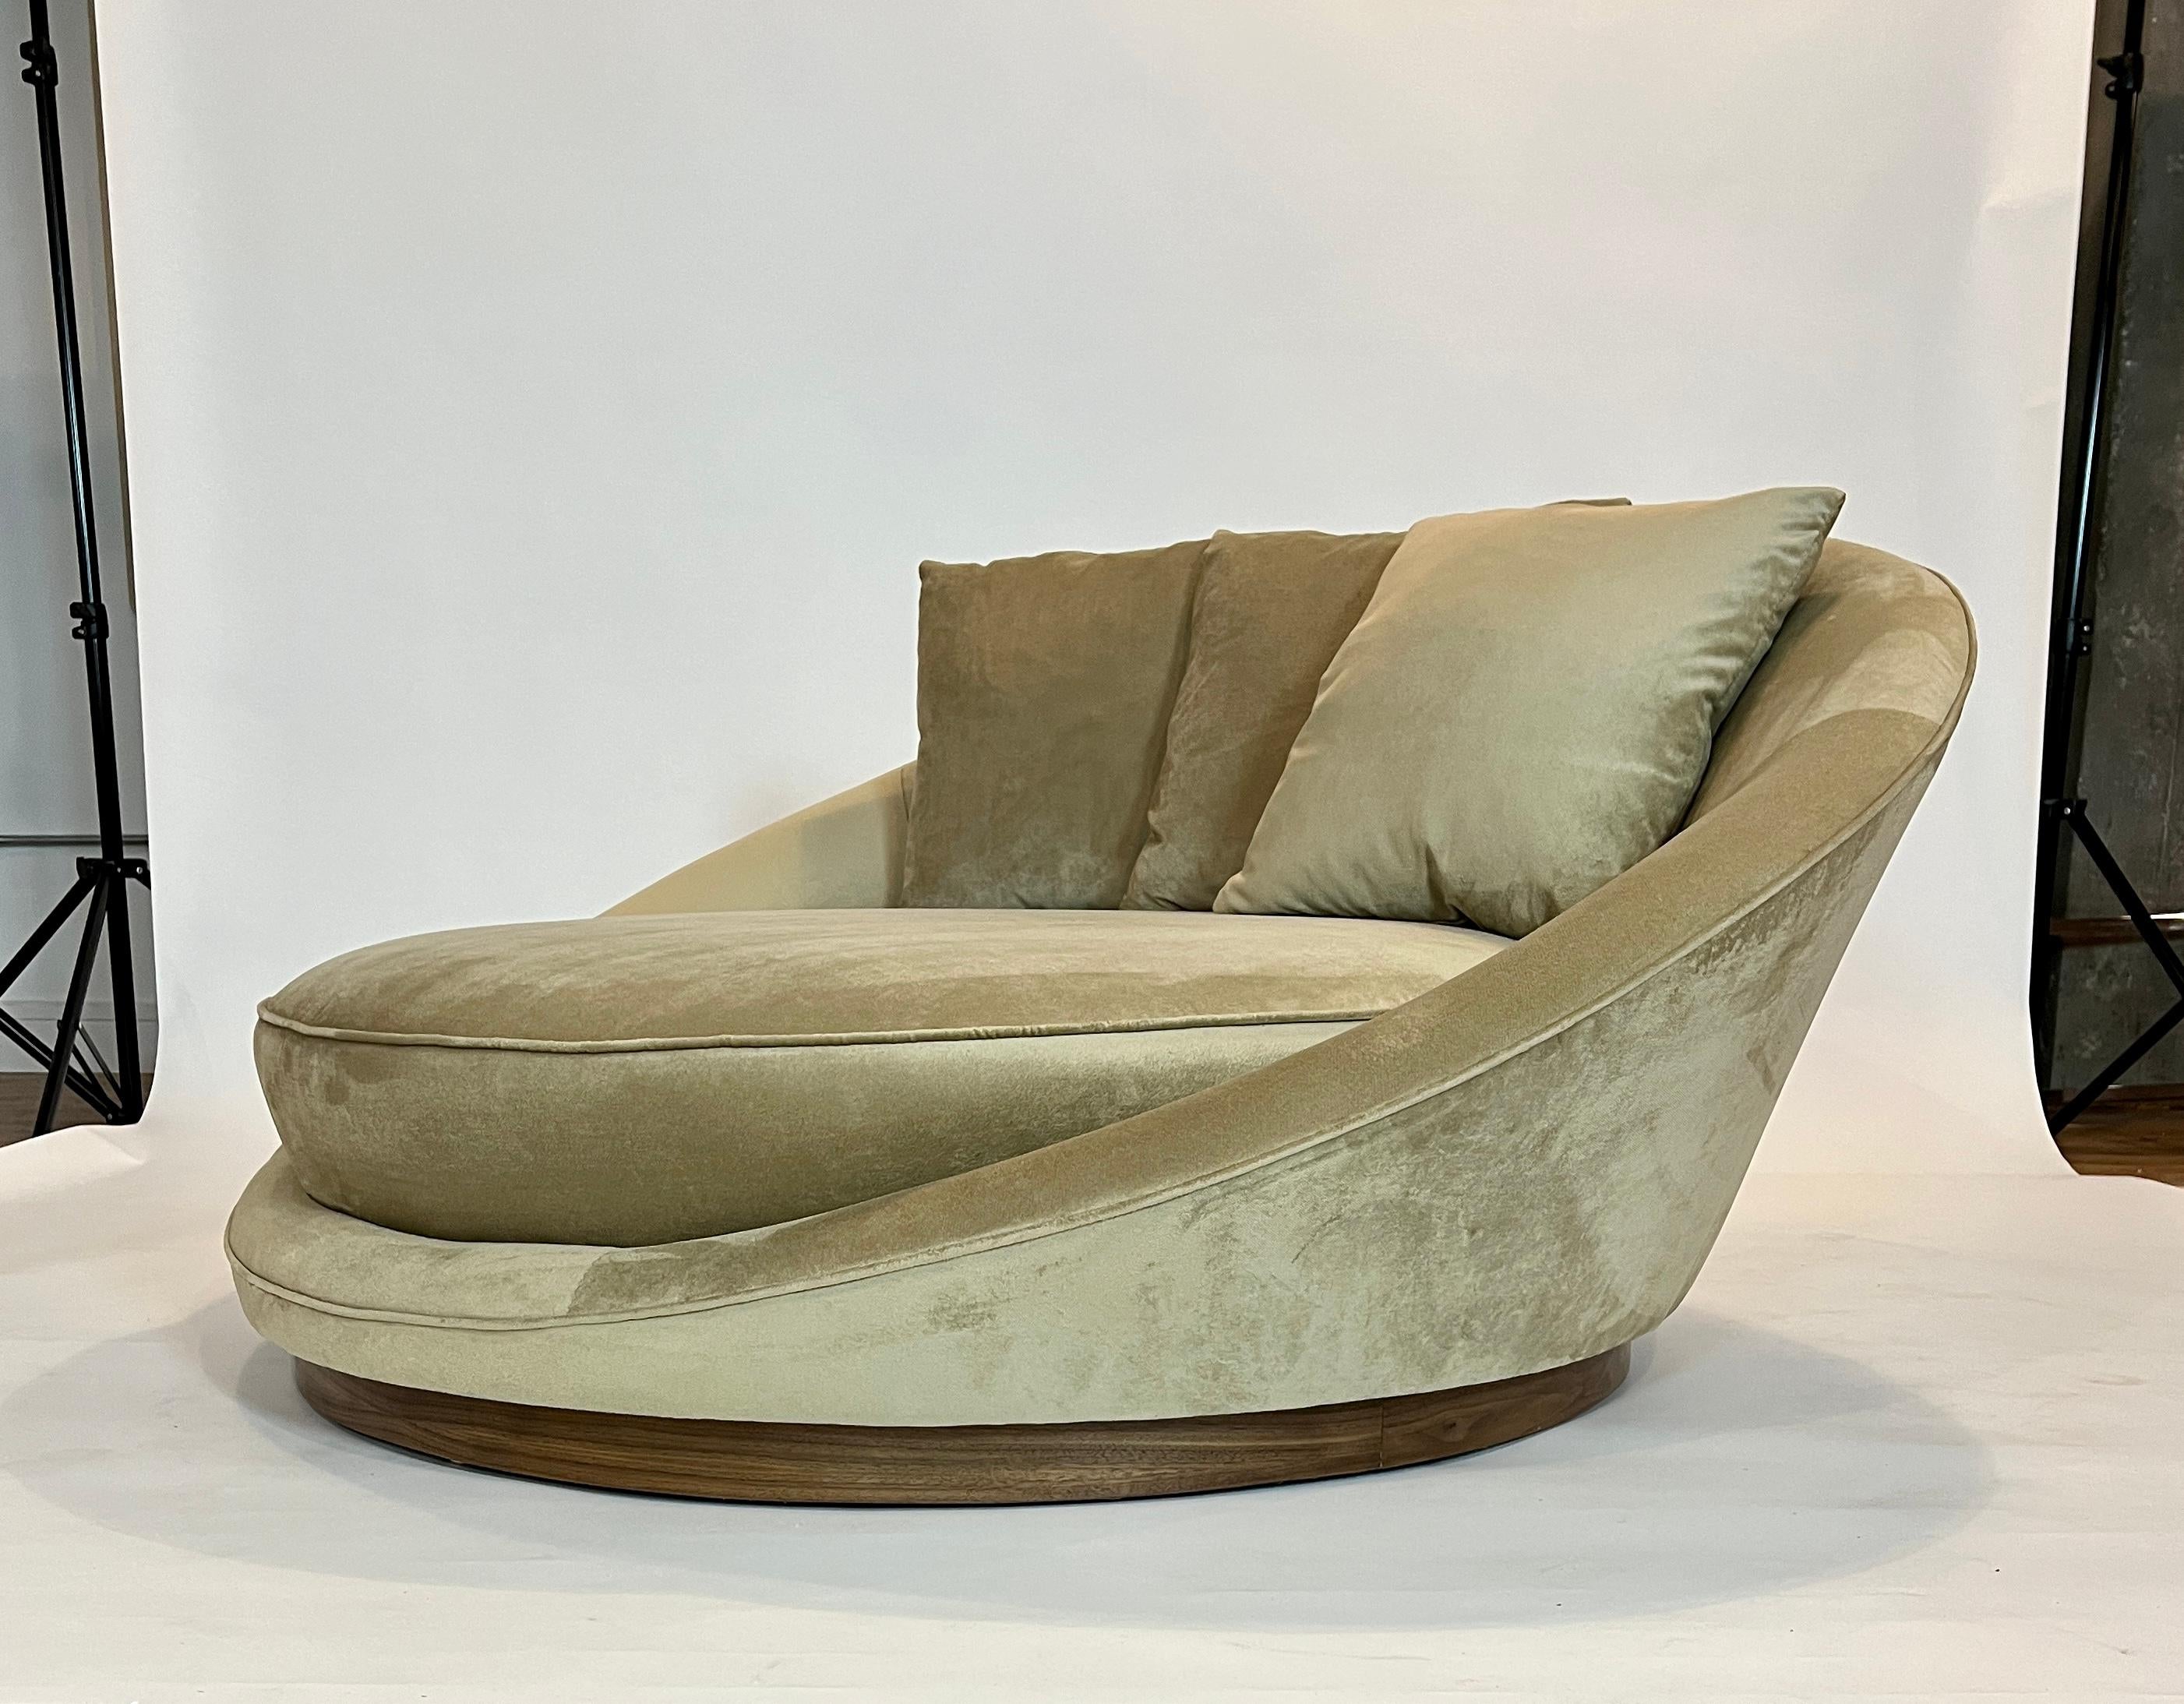 Mid-Century Modern satellite chaise in the style of Milo Baughman beautifully restored in a walnut plinth and upholstered in Pindler & Pindler 